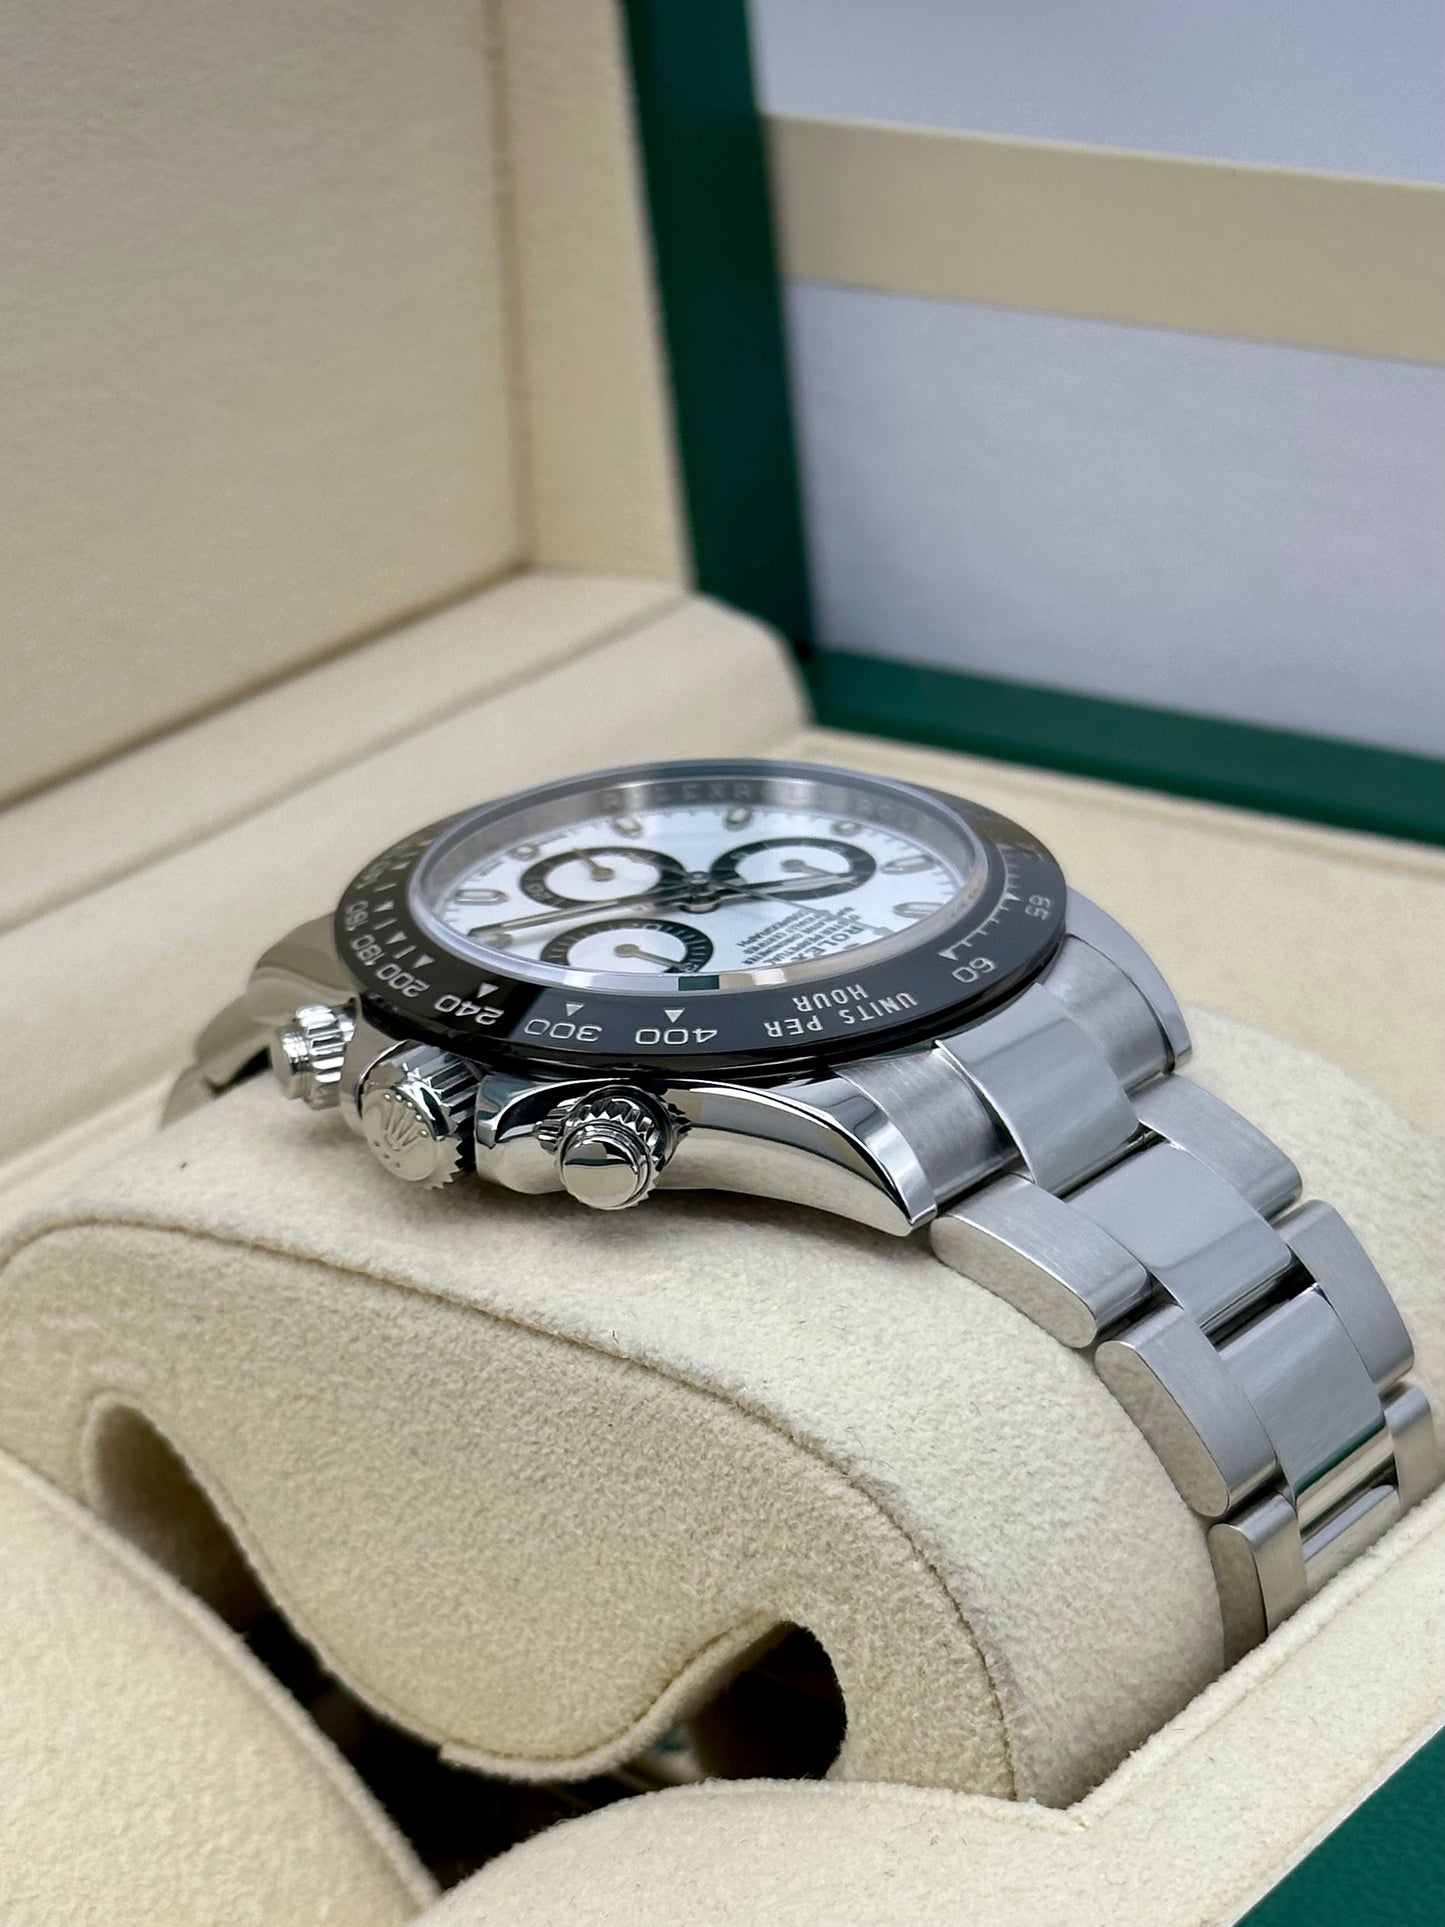 2019 Rolex Daytona 40mm 116500LN Stainless Steel White Panda Dial - MyWatchLLC